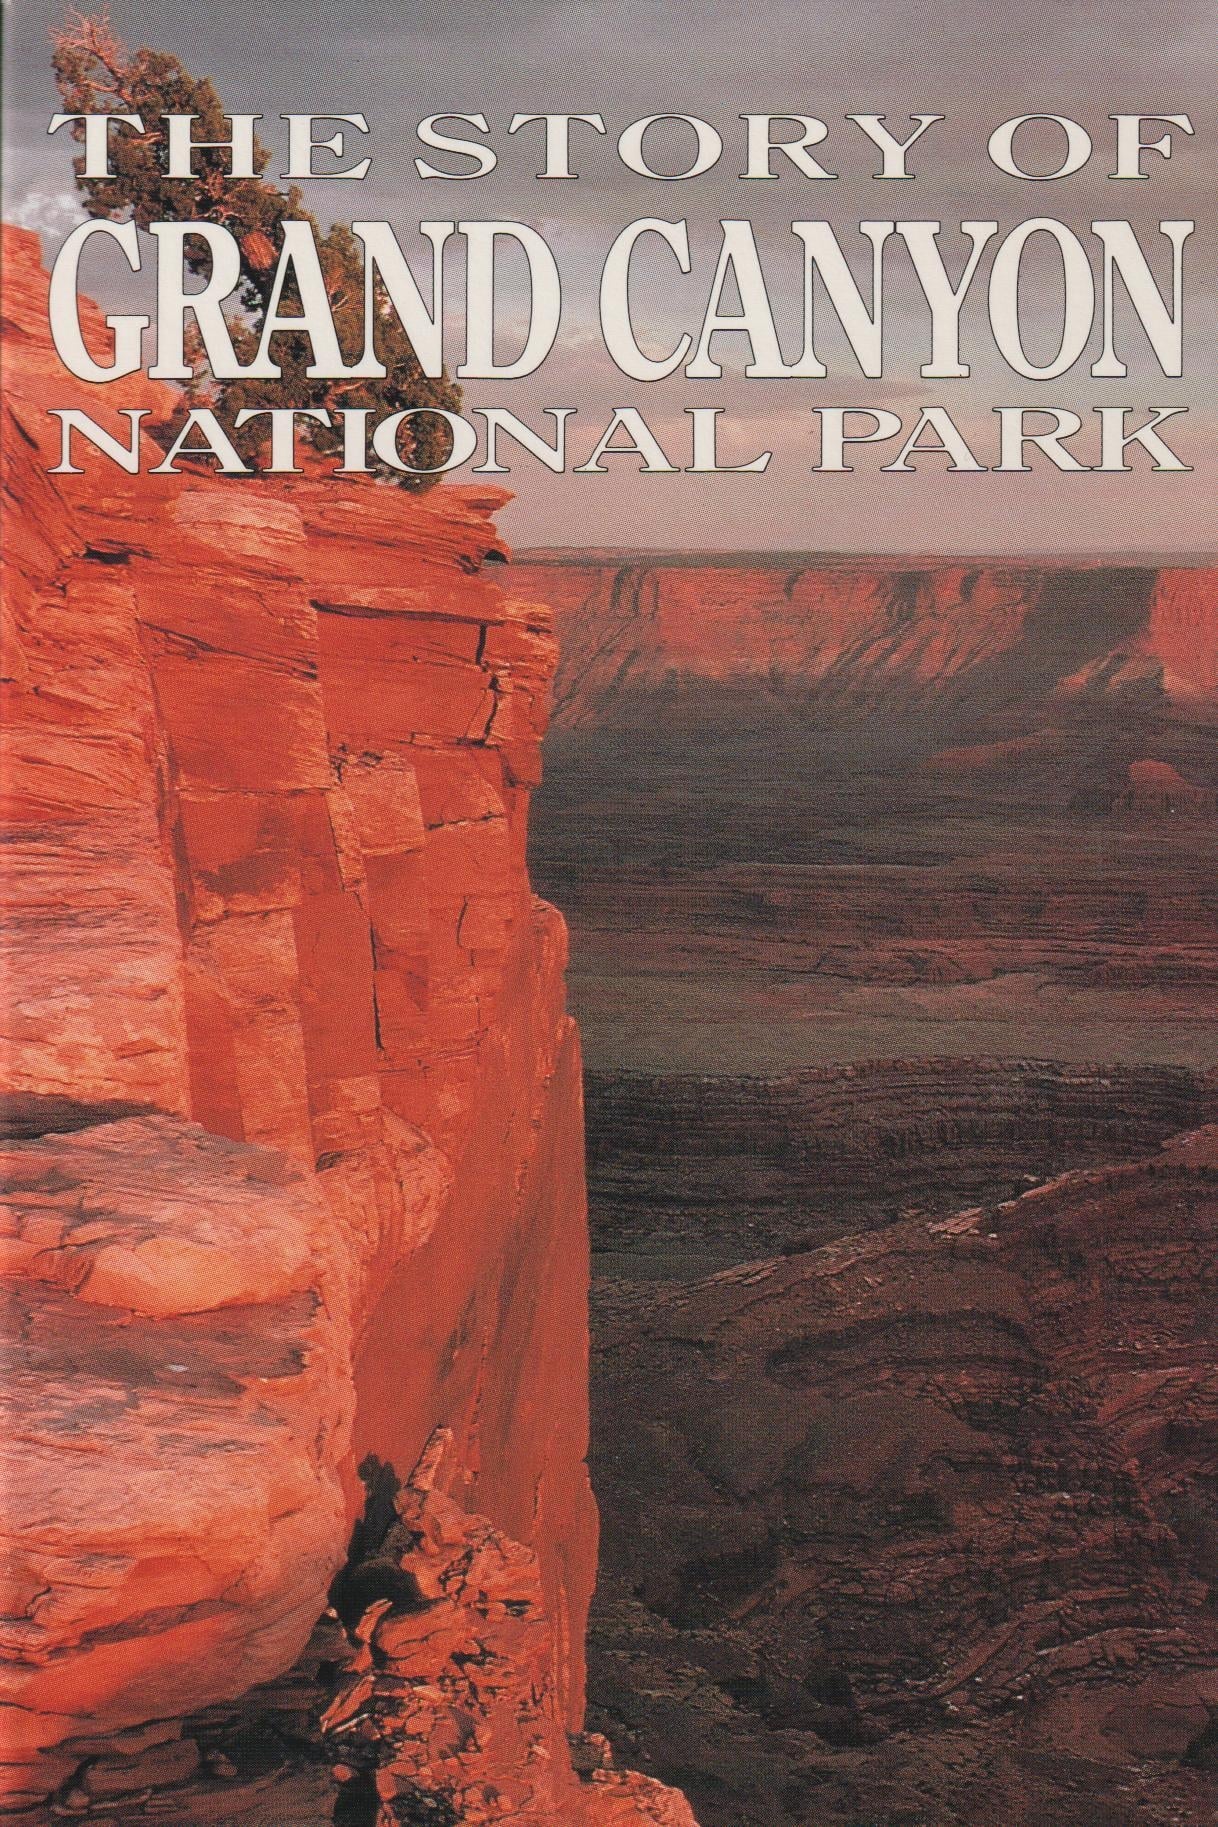 The Story of Grand Canyon National Park